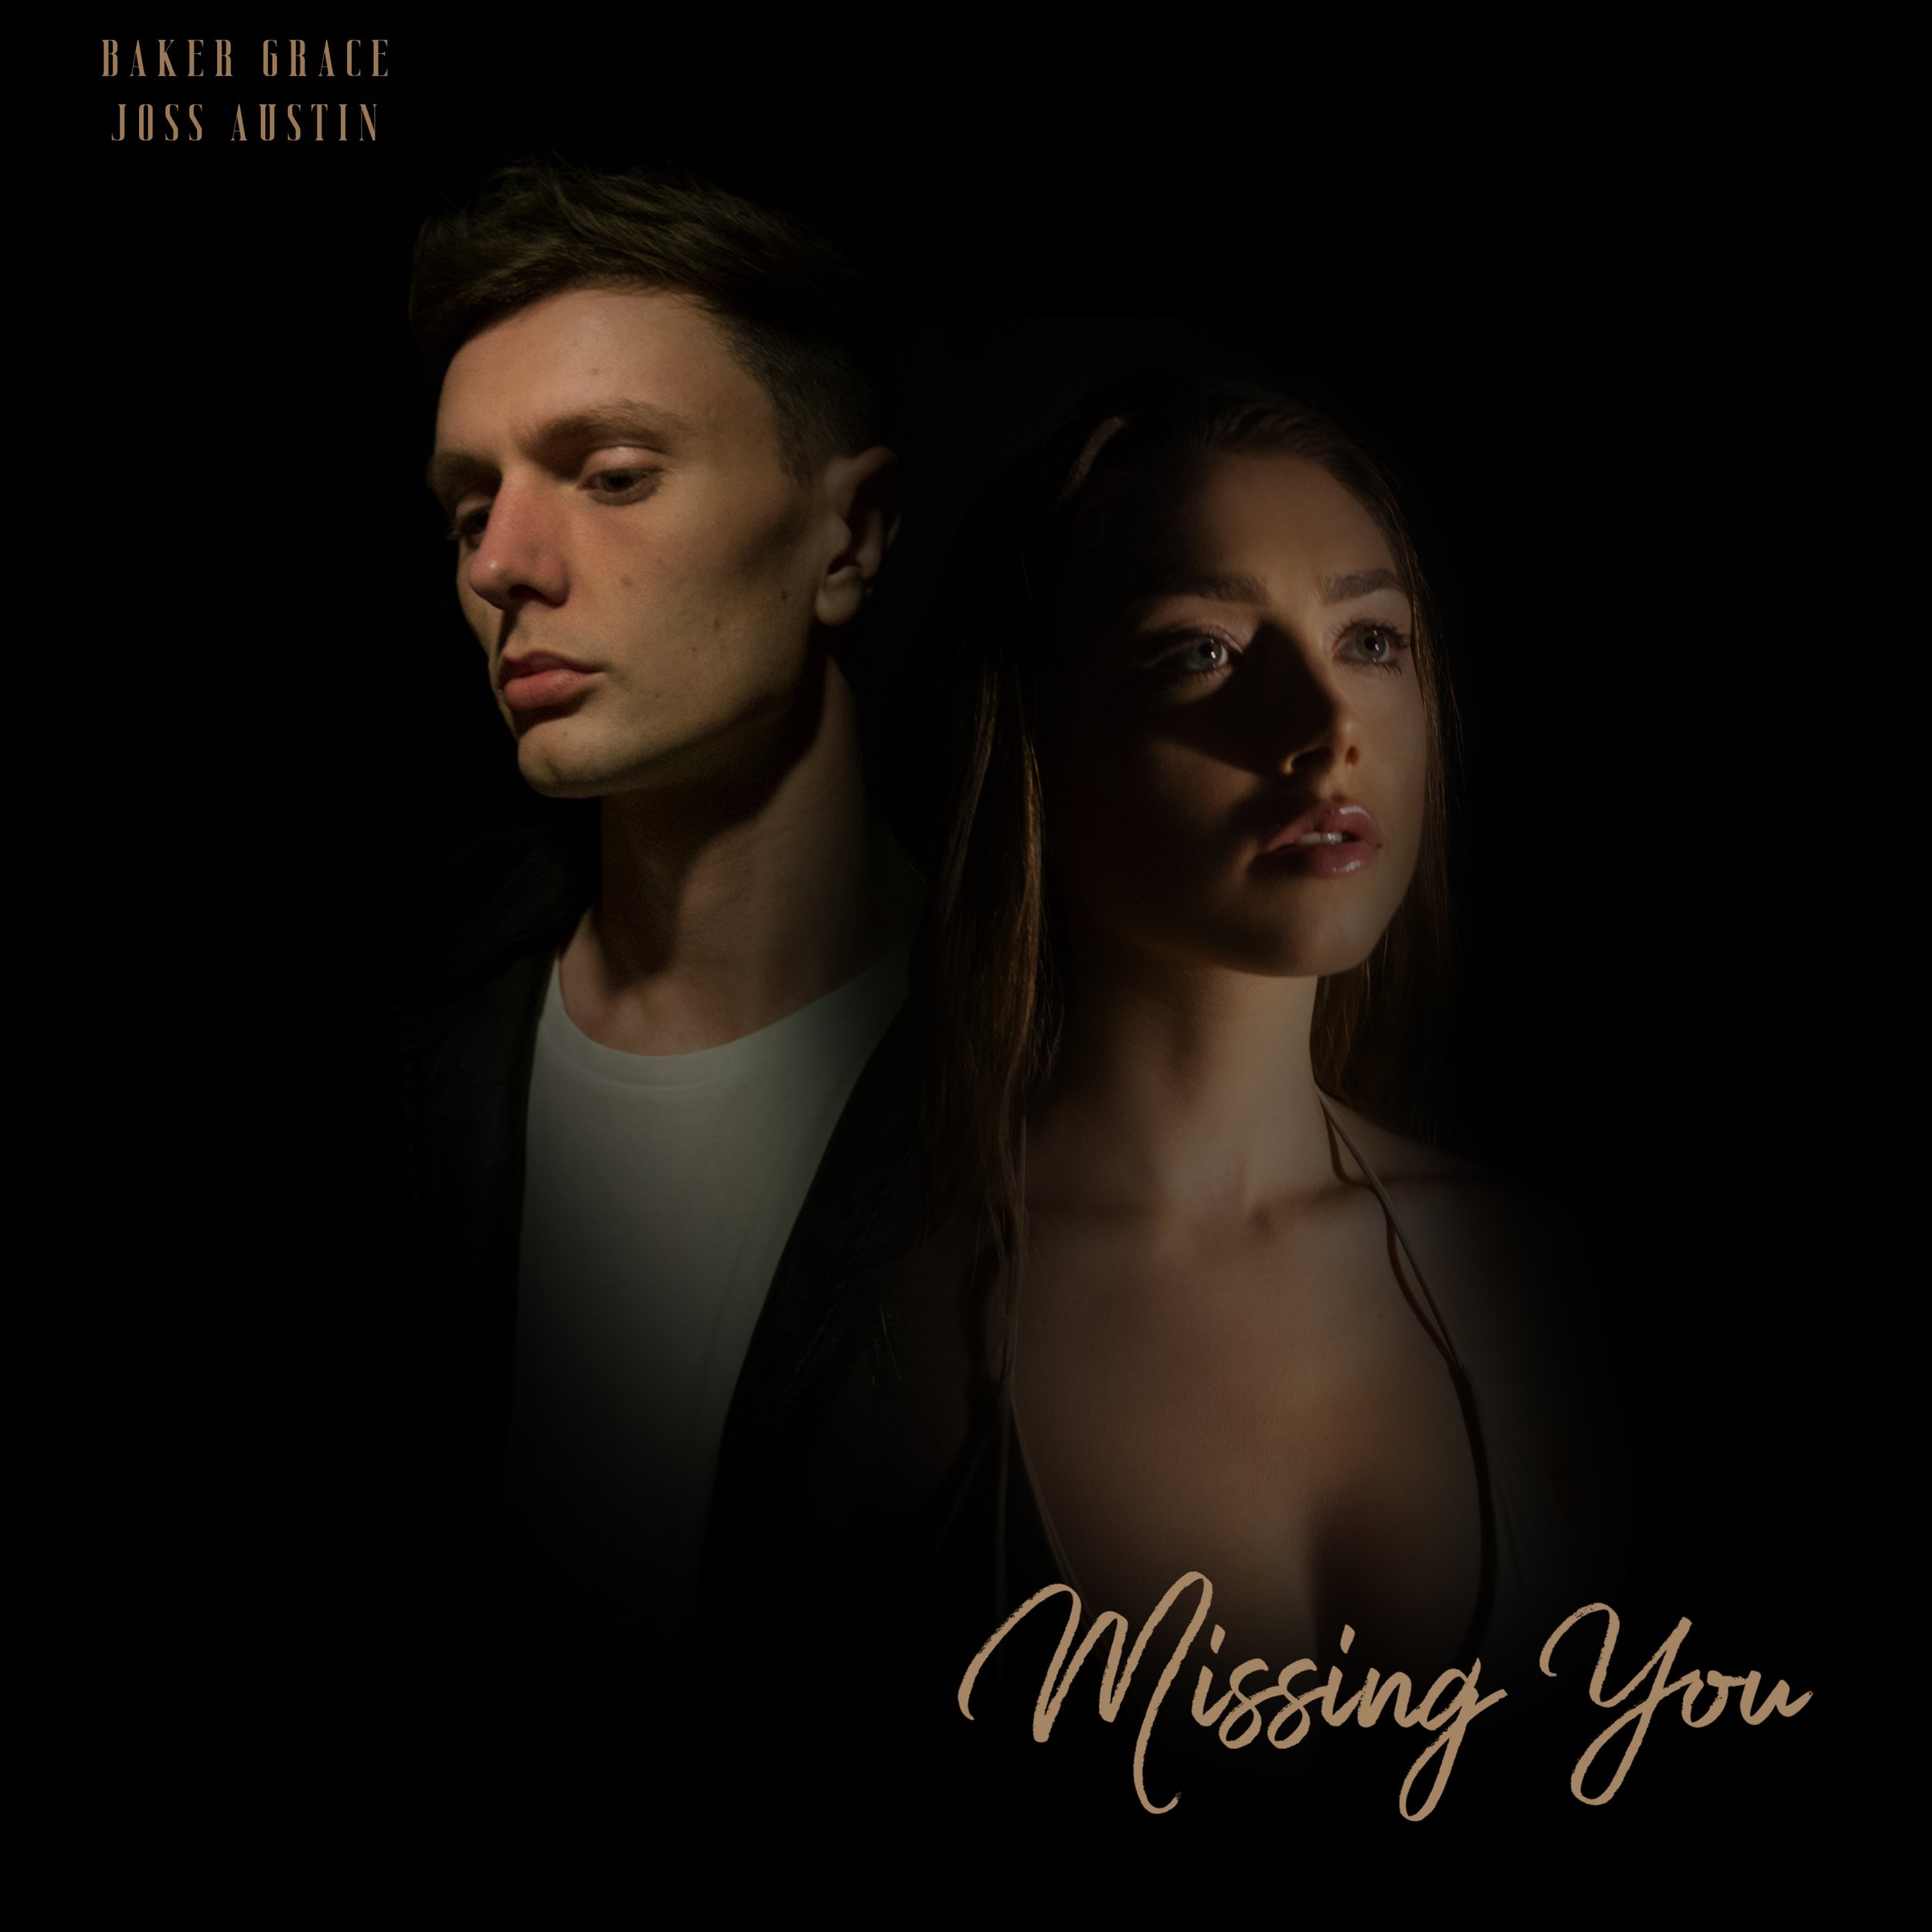 Missing you cover art.jpeg